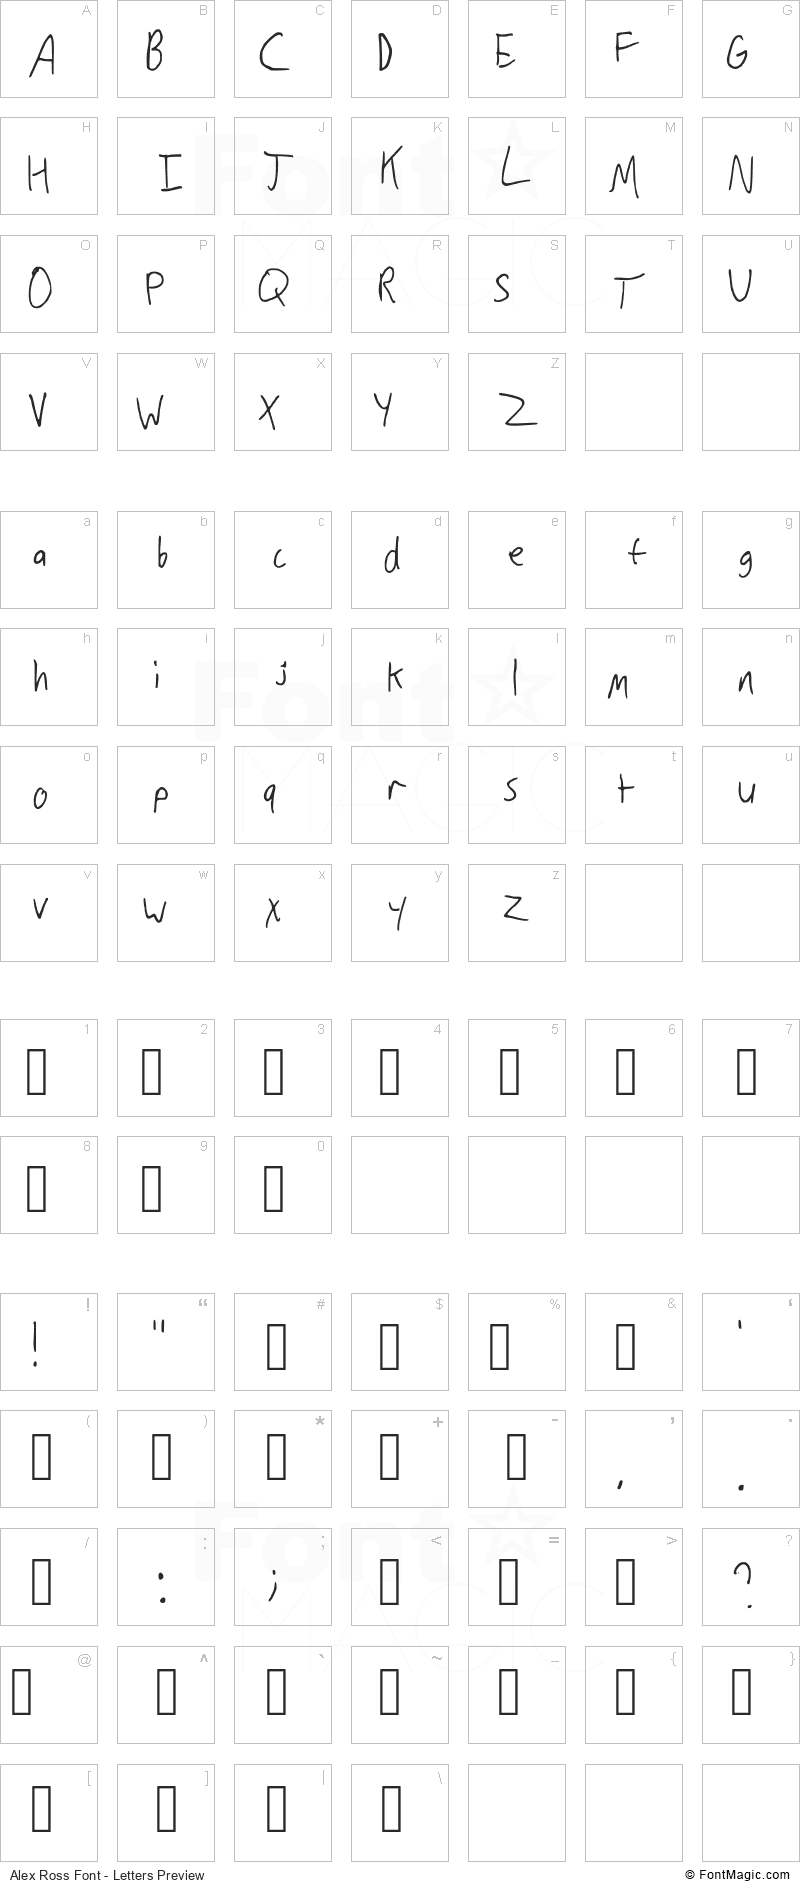 Alex Ross Font - All Latters Preview Chart